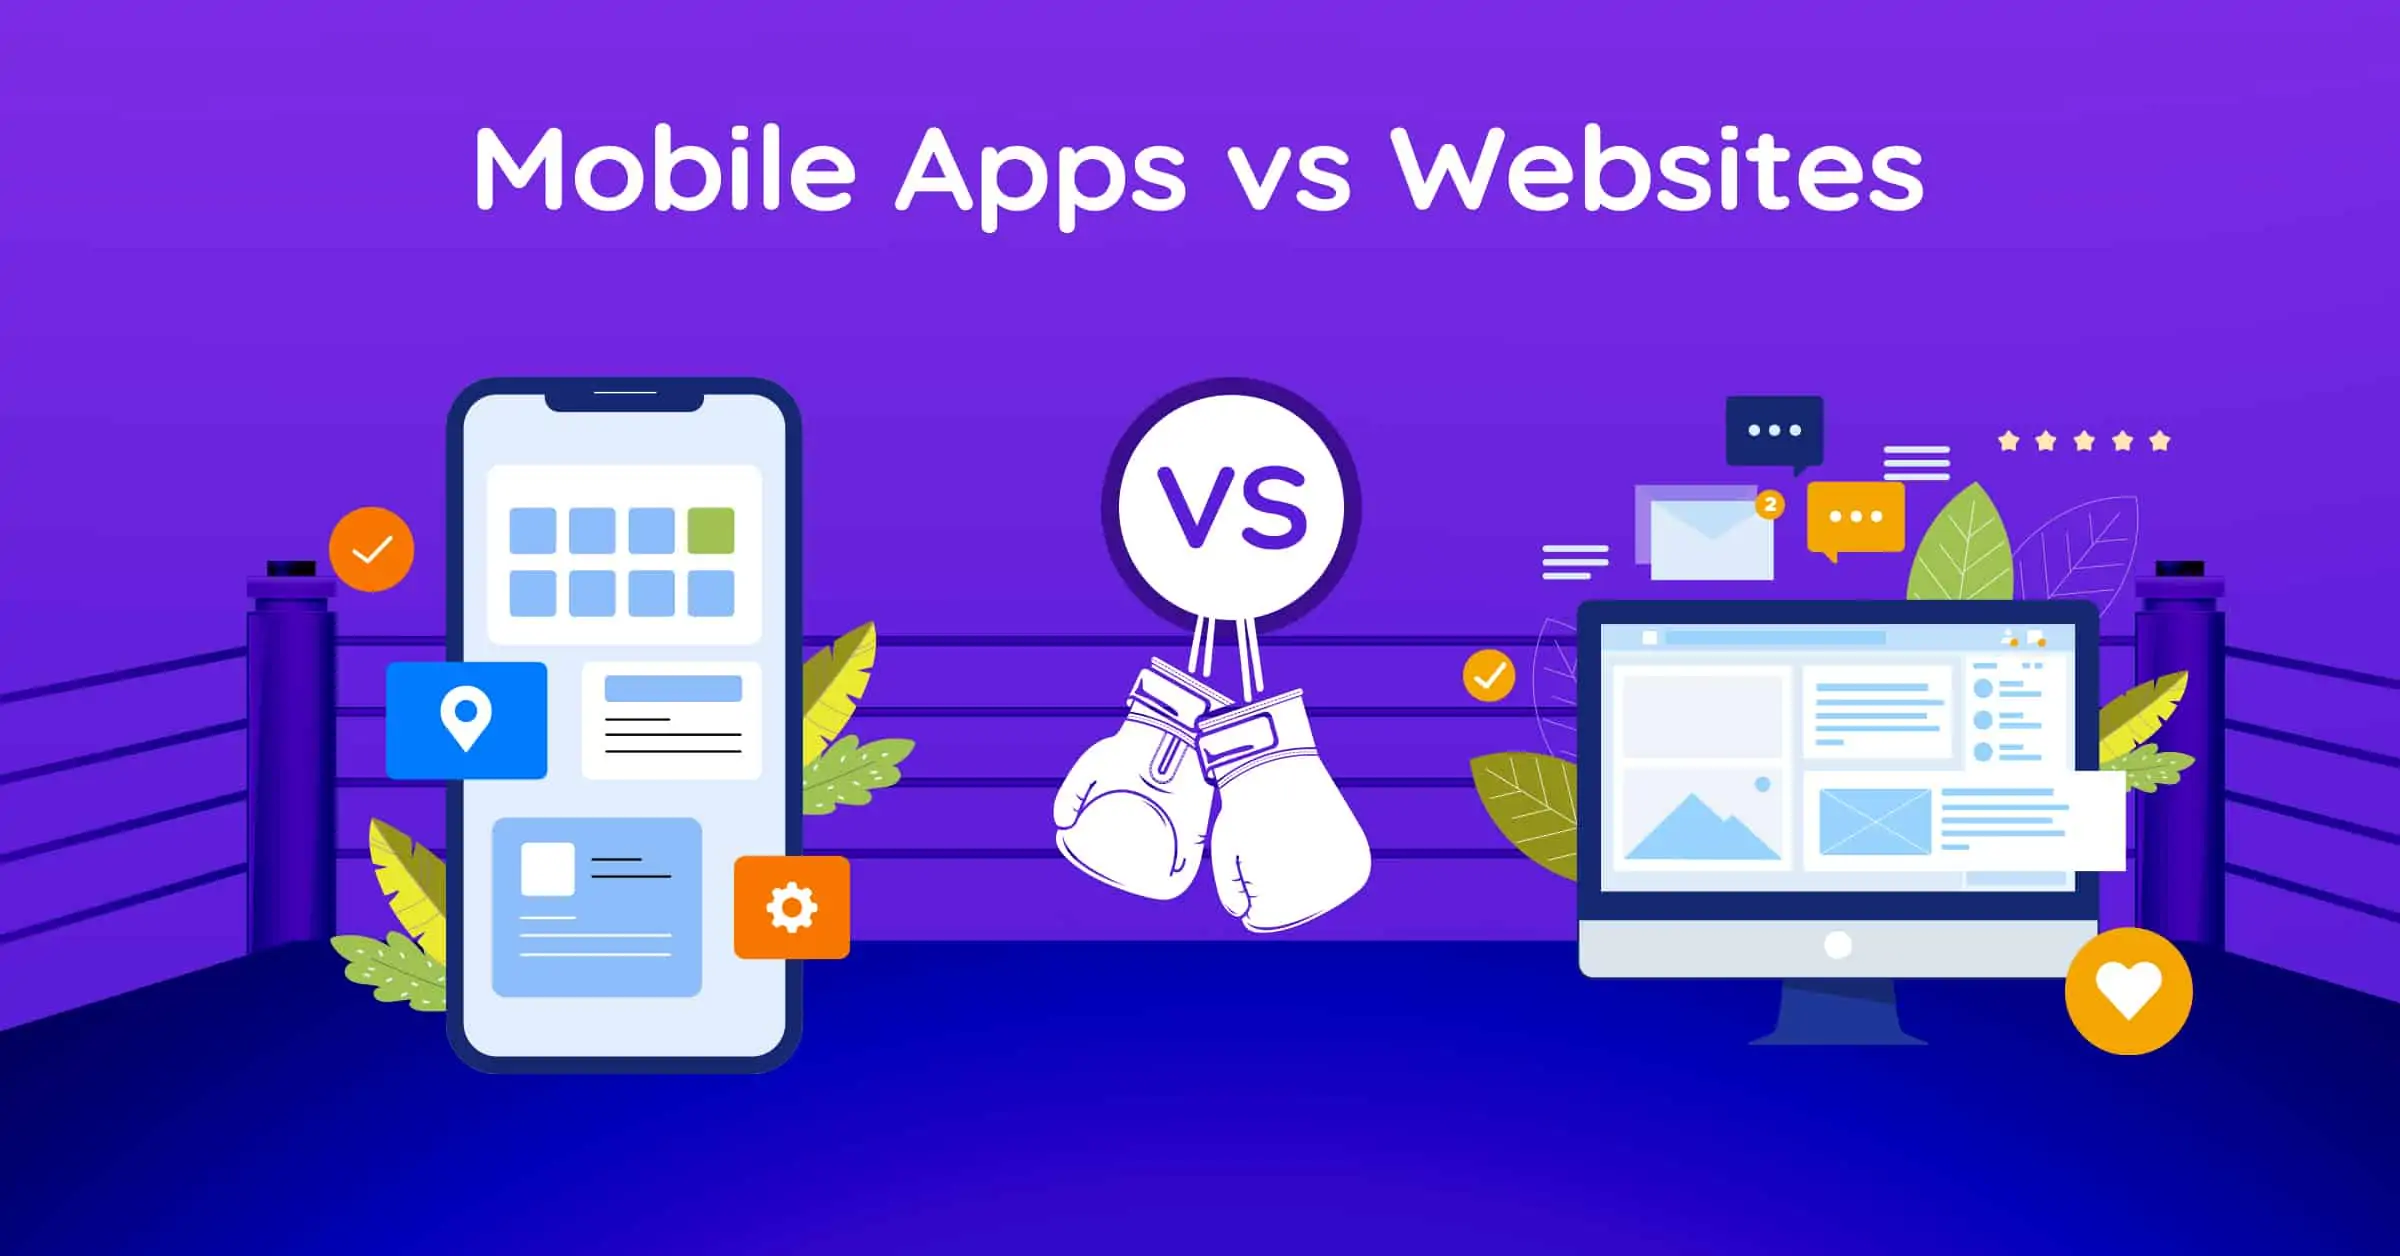 This is the cover image of a blog post which details down mobile app vs website features. It gives a comparison of the benefits and drawbacks of mobile apps and websites.